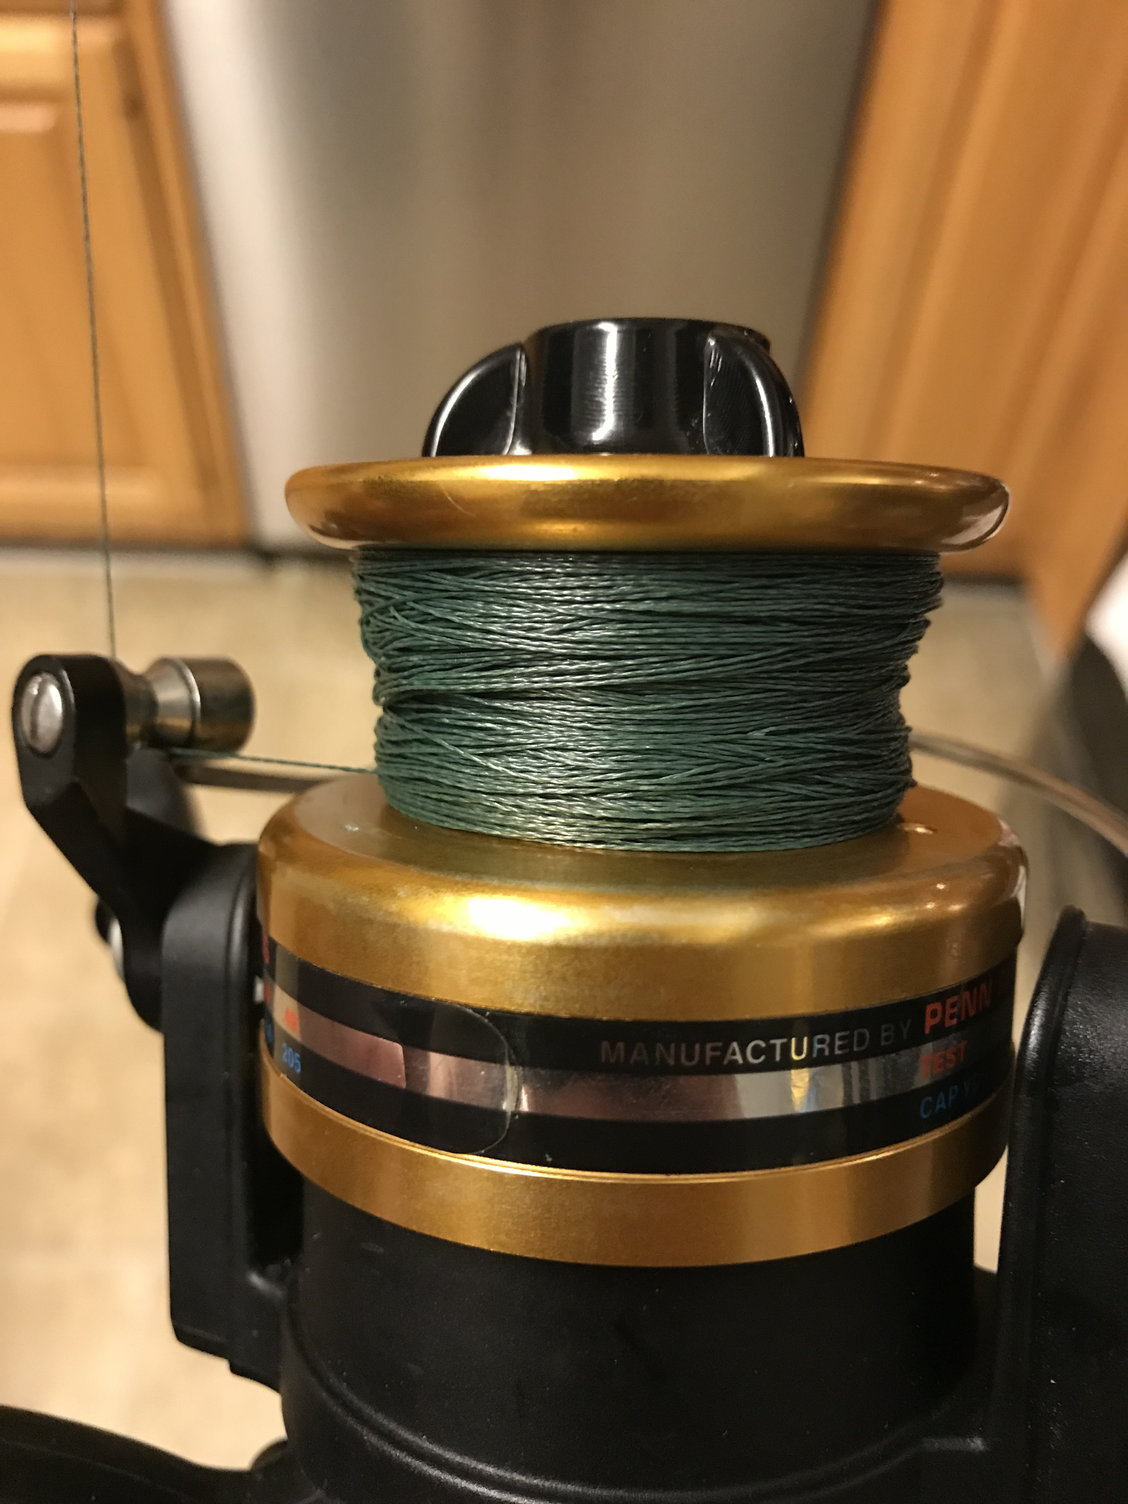 Where are Penn Fishing Reels Made? [Here is the Truth]